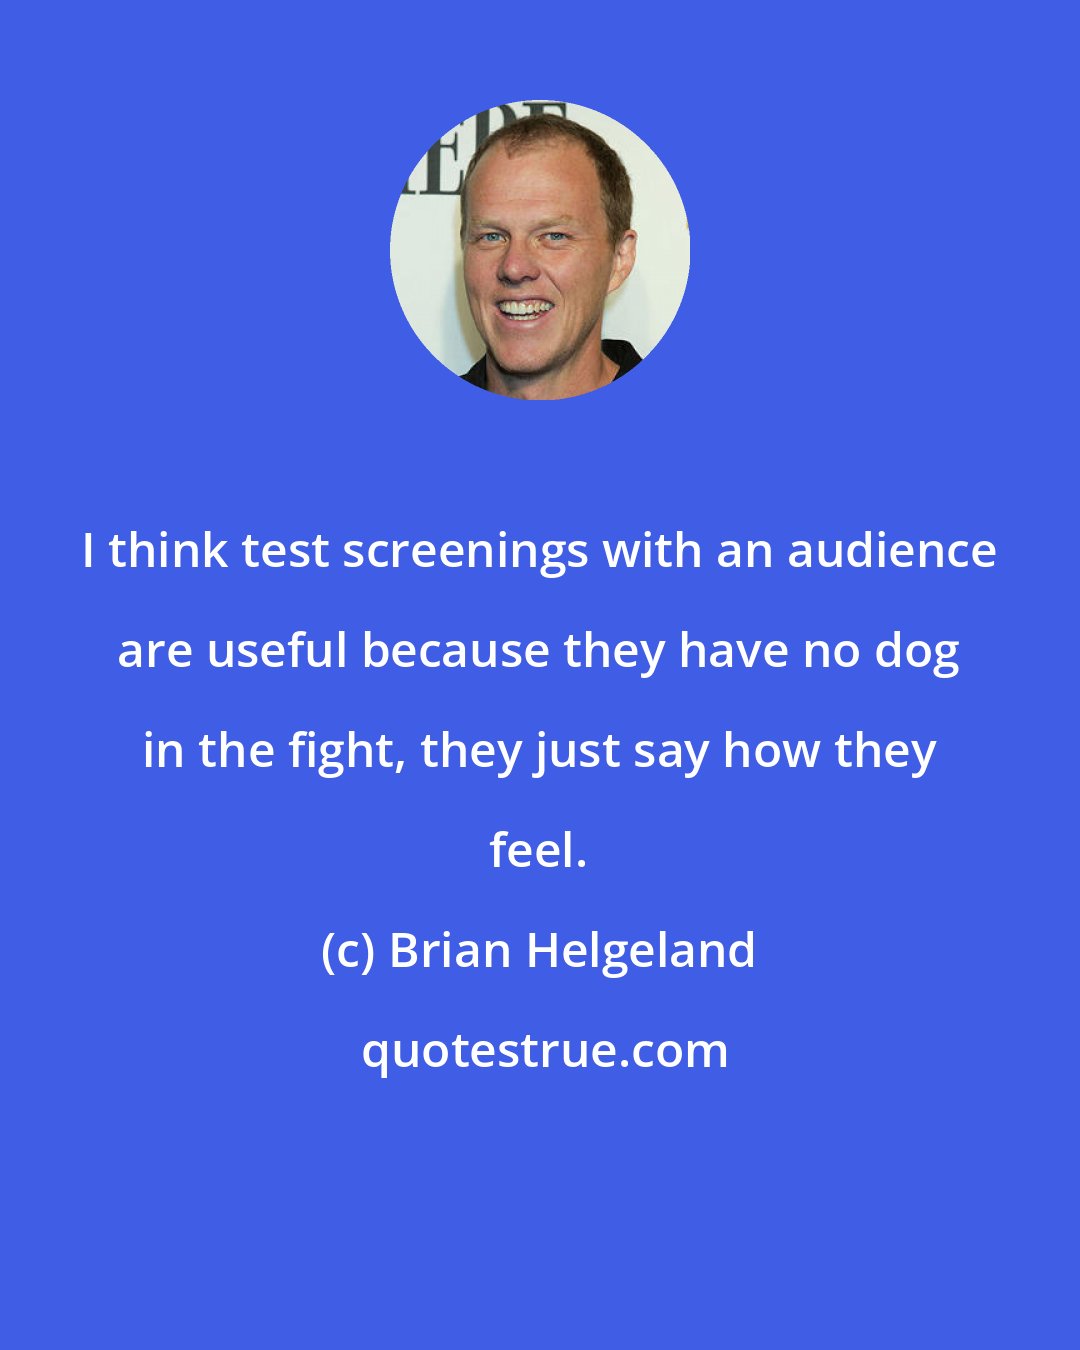 Brian Helgeland: I think test screenings with an audience are useful because they have no dog in the fight, they just say how they feel.